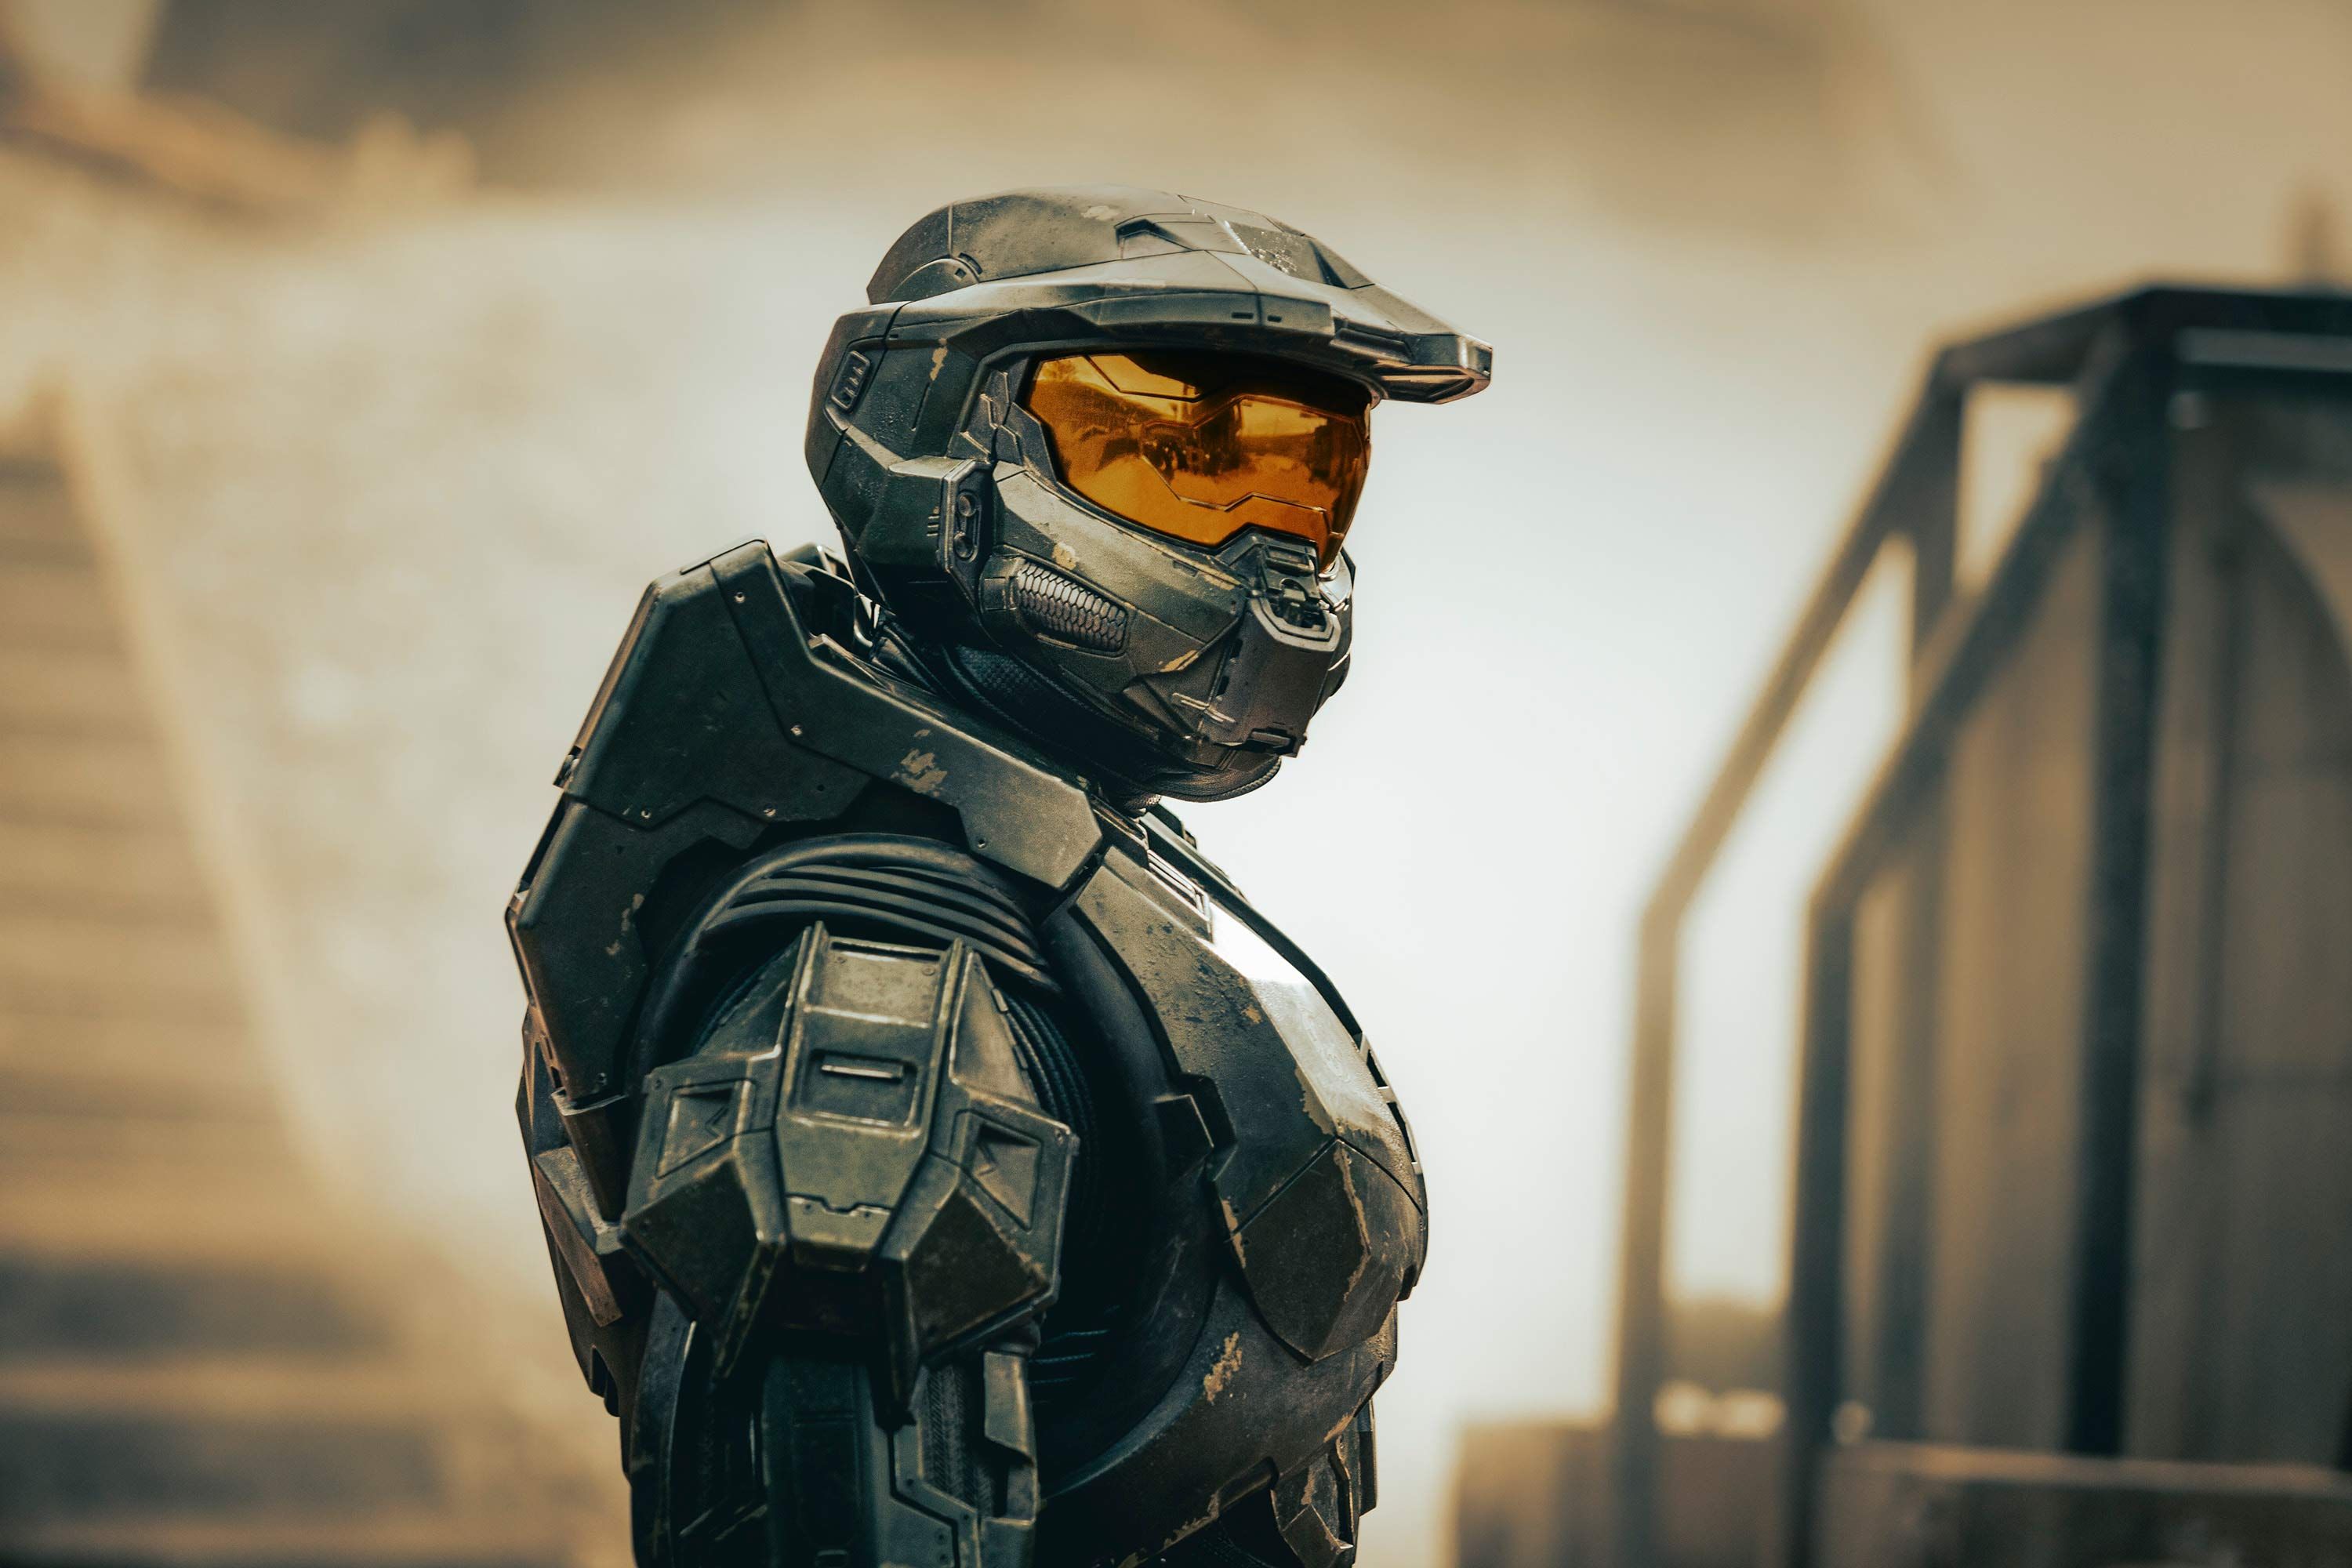 How to watch Halo TV series in the UK